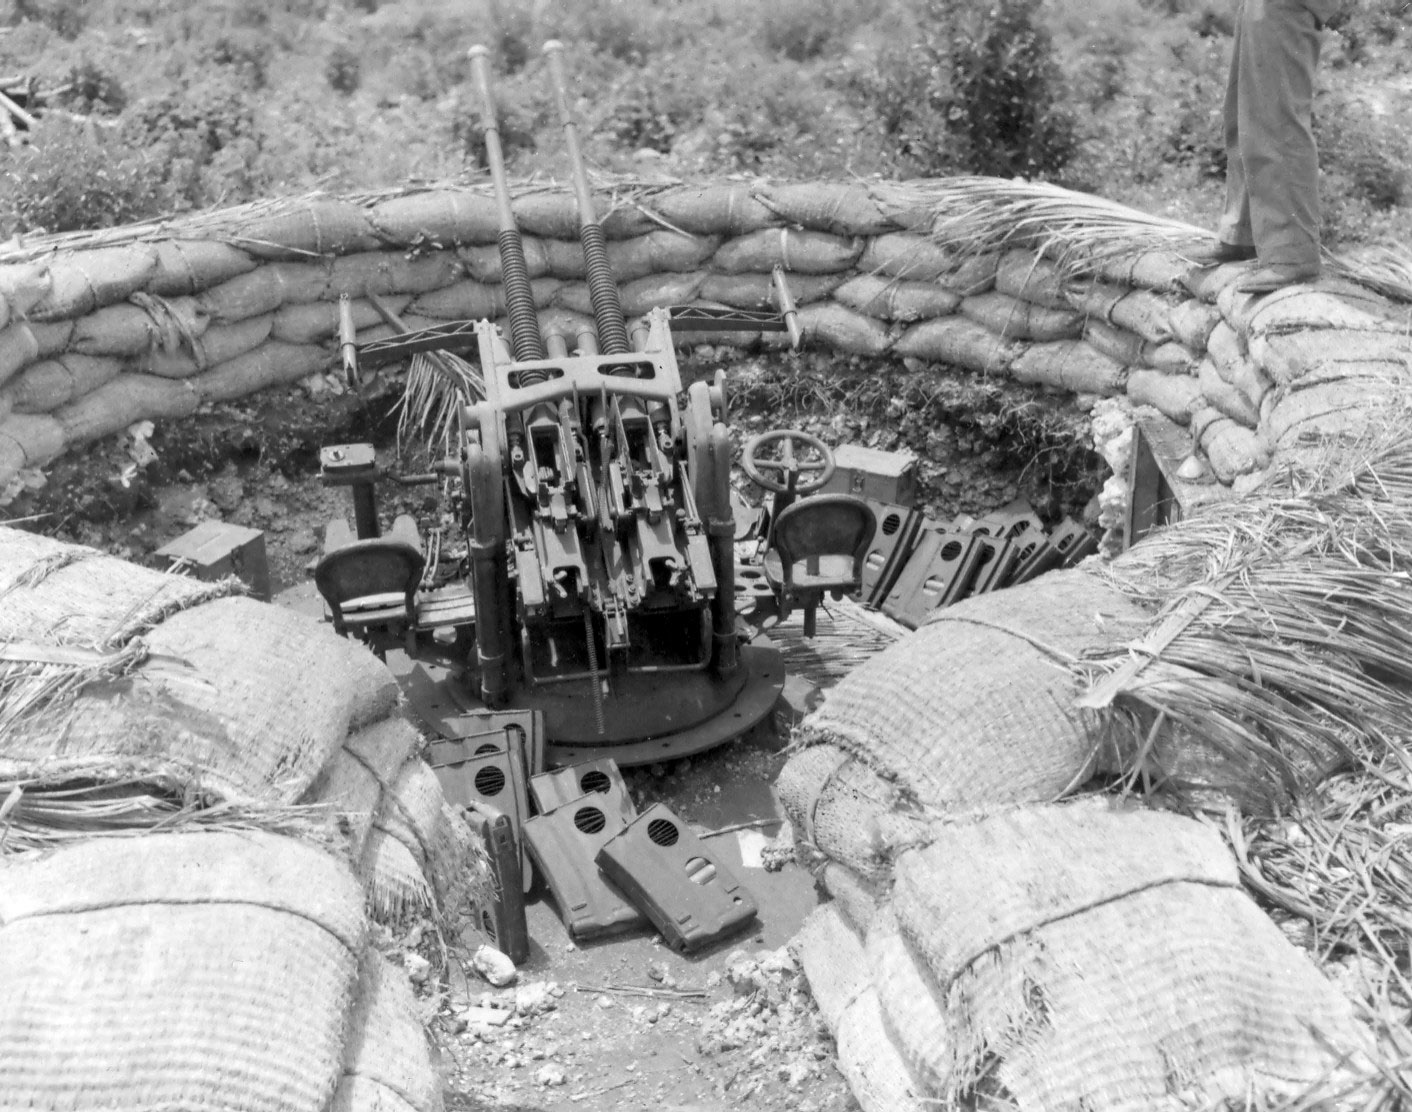 Japanese 25mm anti-aircraft gun in a 13ft revetment or emplacement located on the northern side of the Agana Airfield, Guam, Mariana Islands, 5 Oct 1944